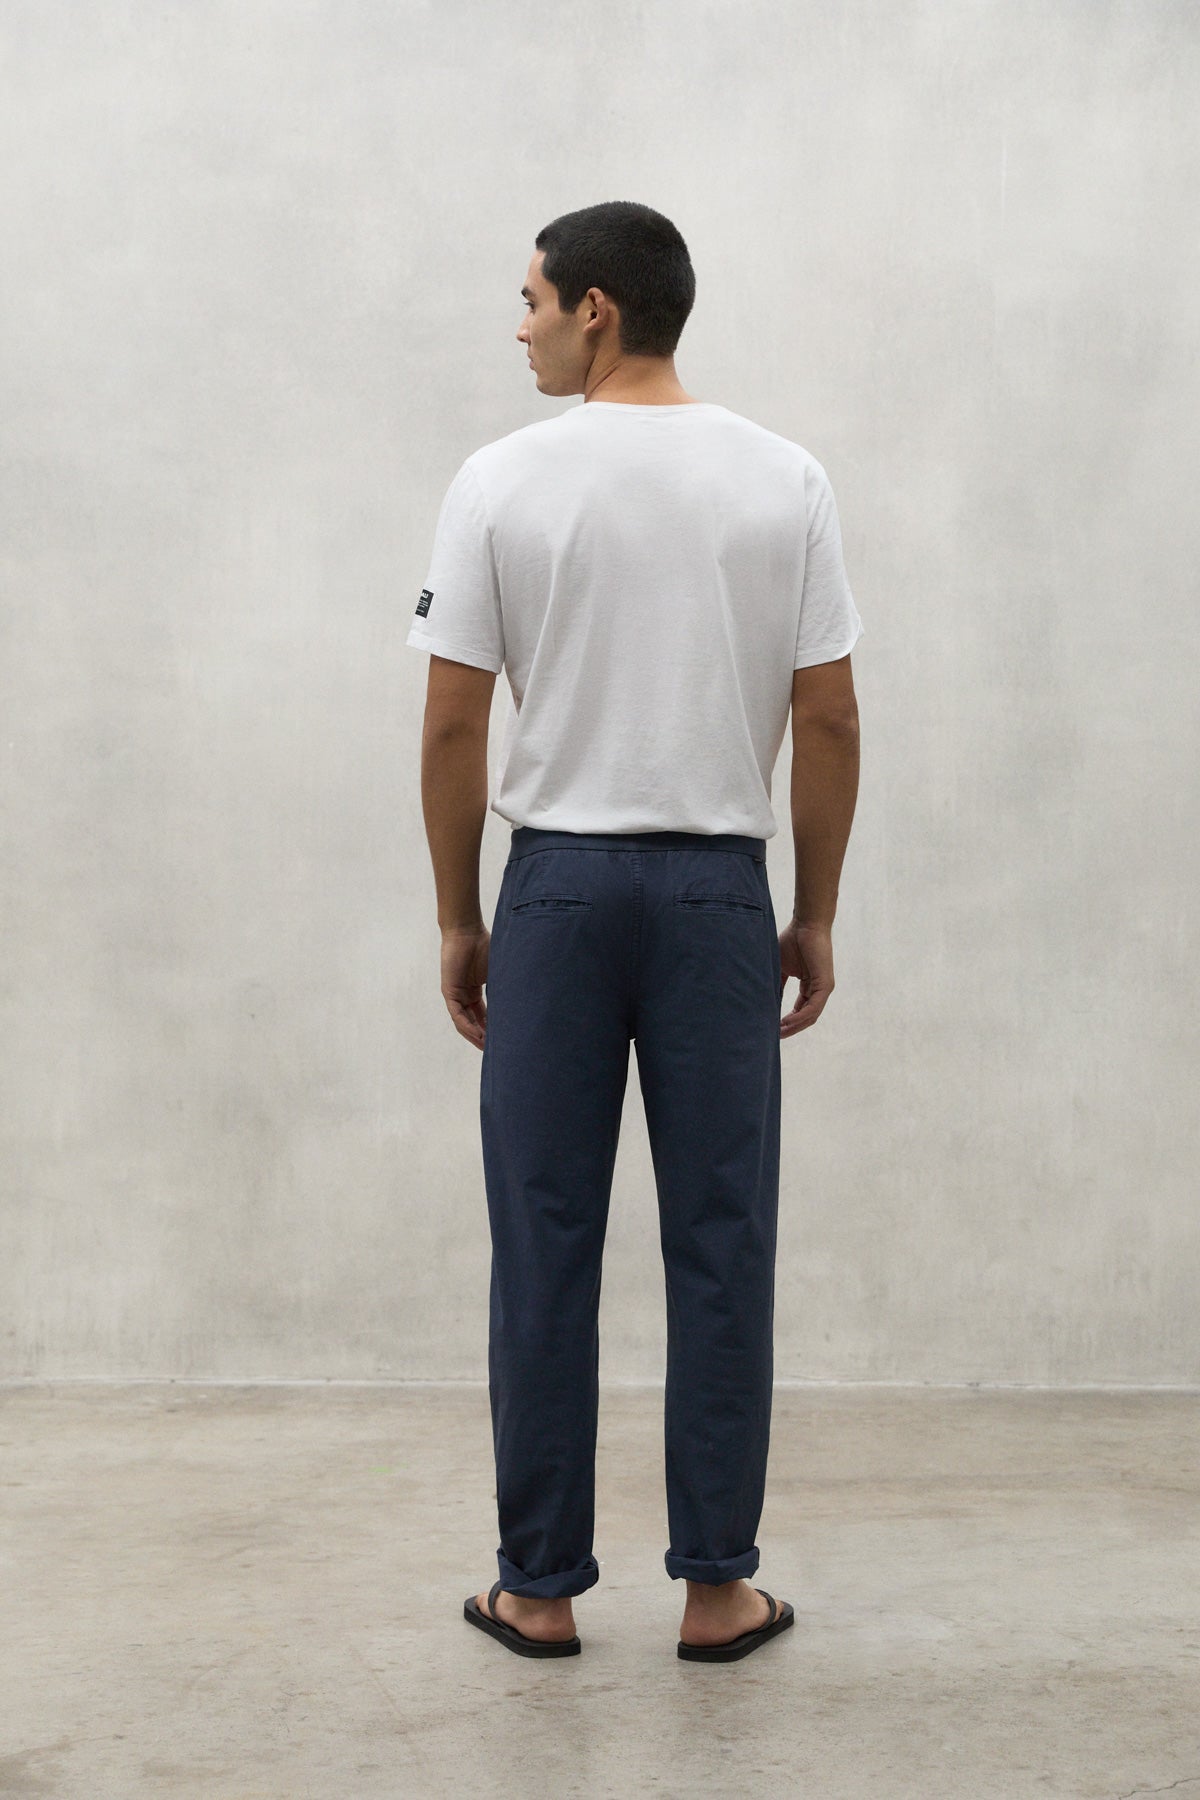 NAVY BLUE ISNA TROUSERS